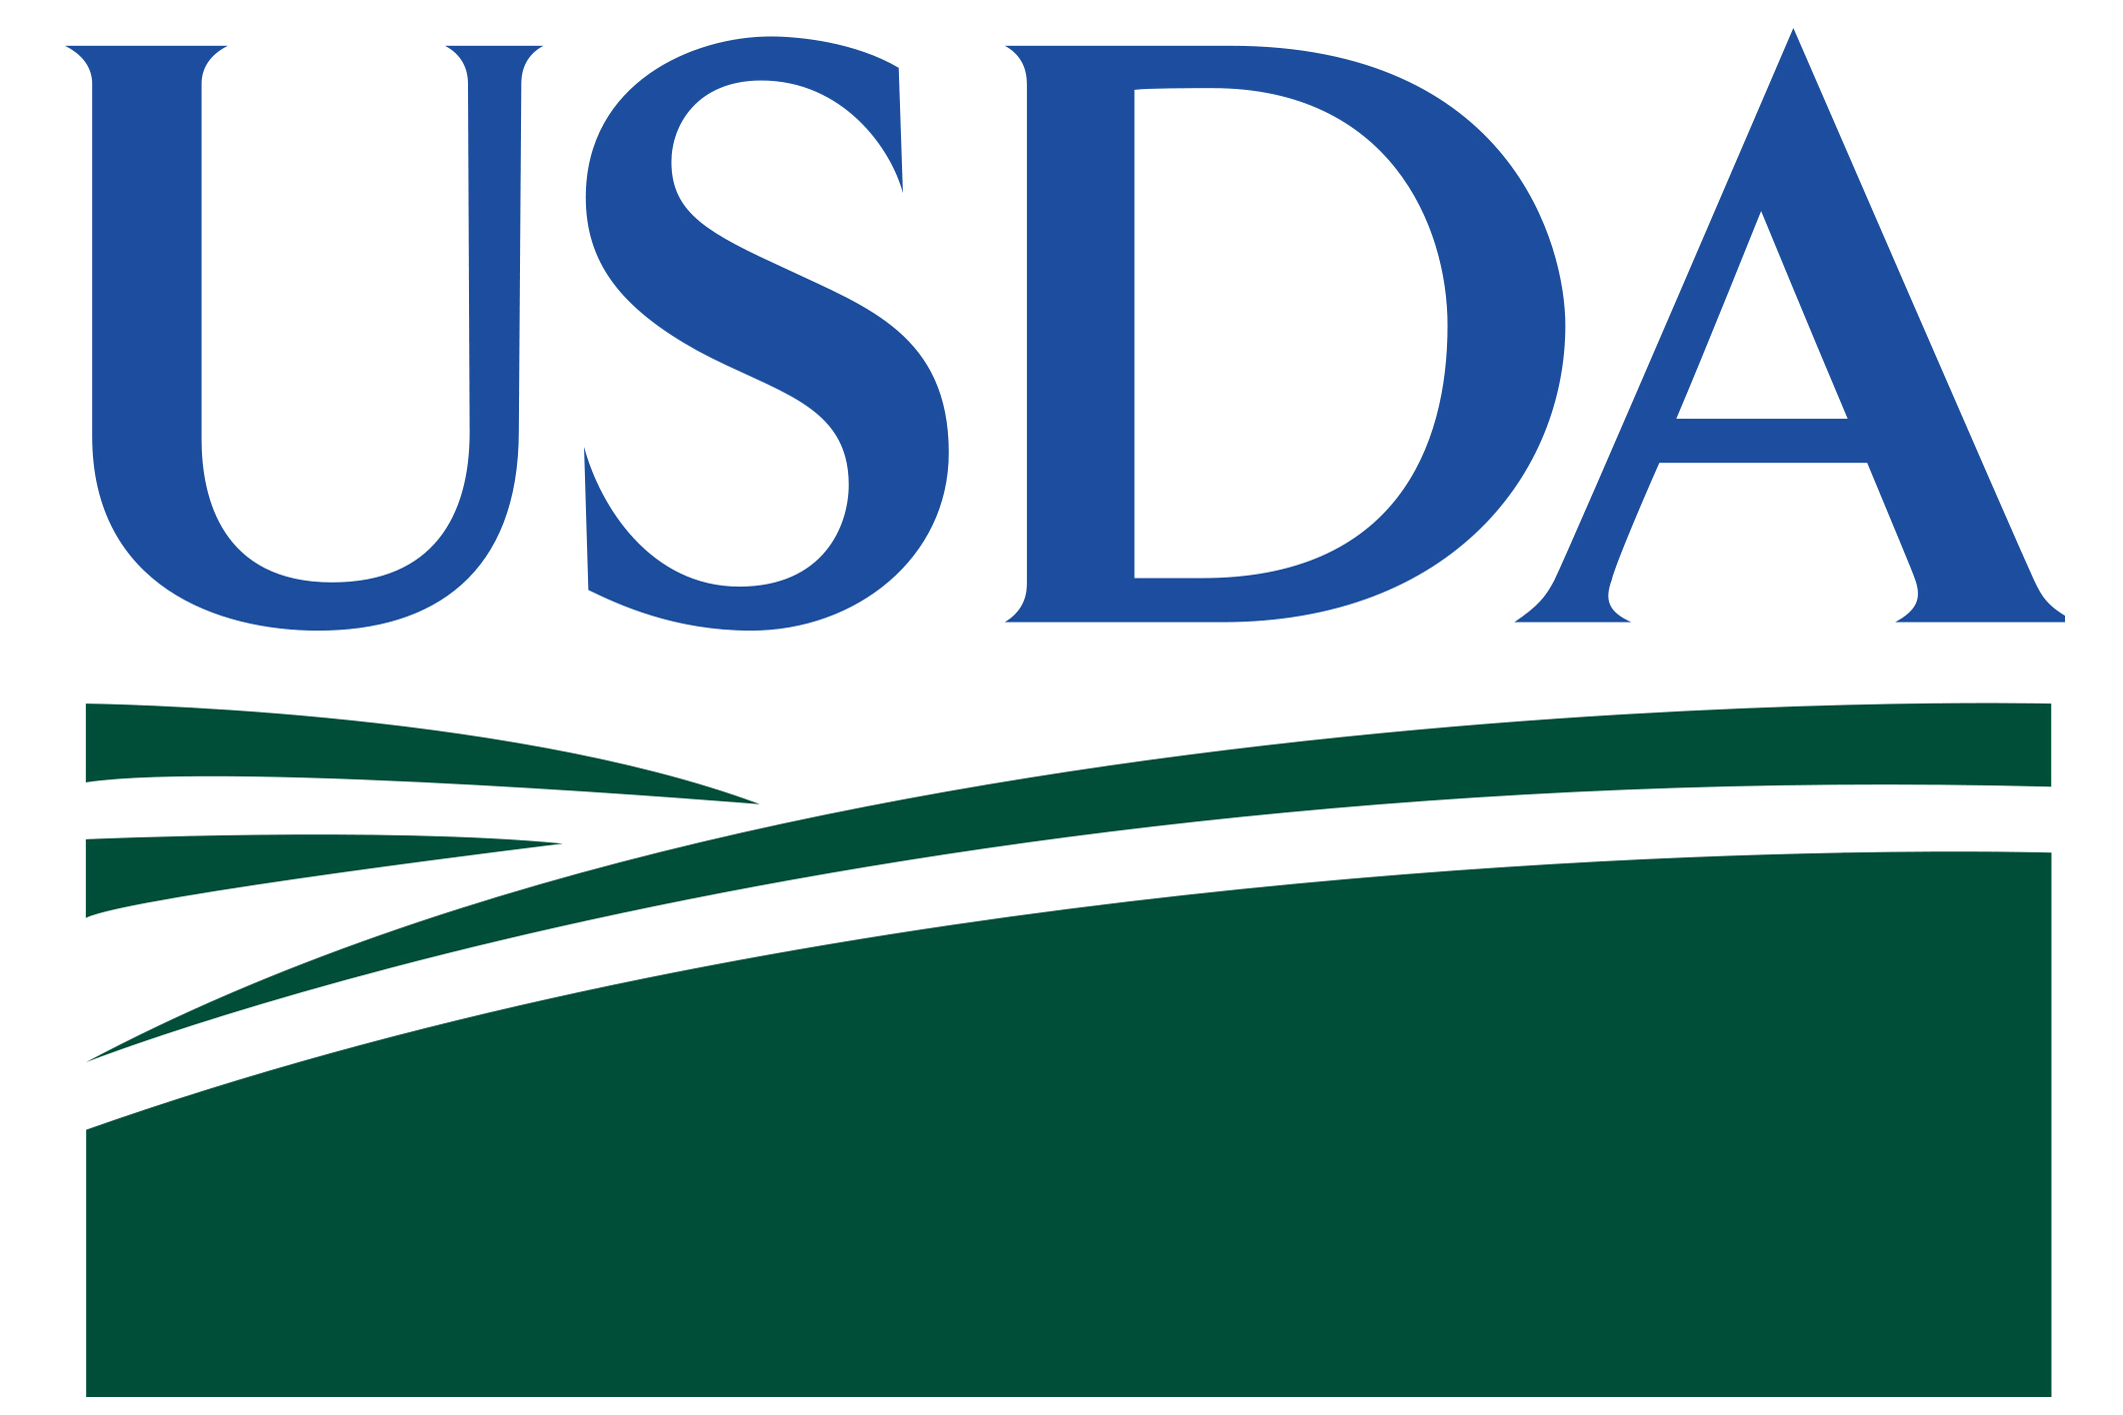 Logo for the United States Department of Agriculture